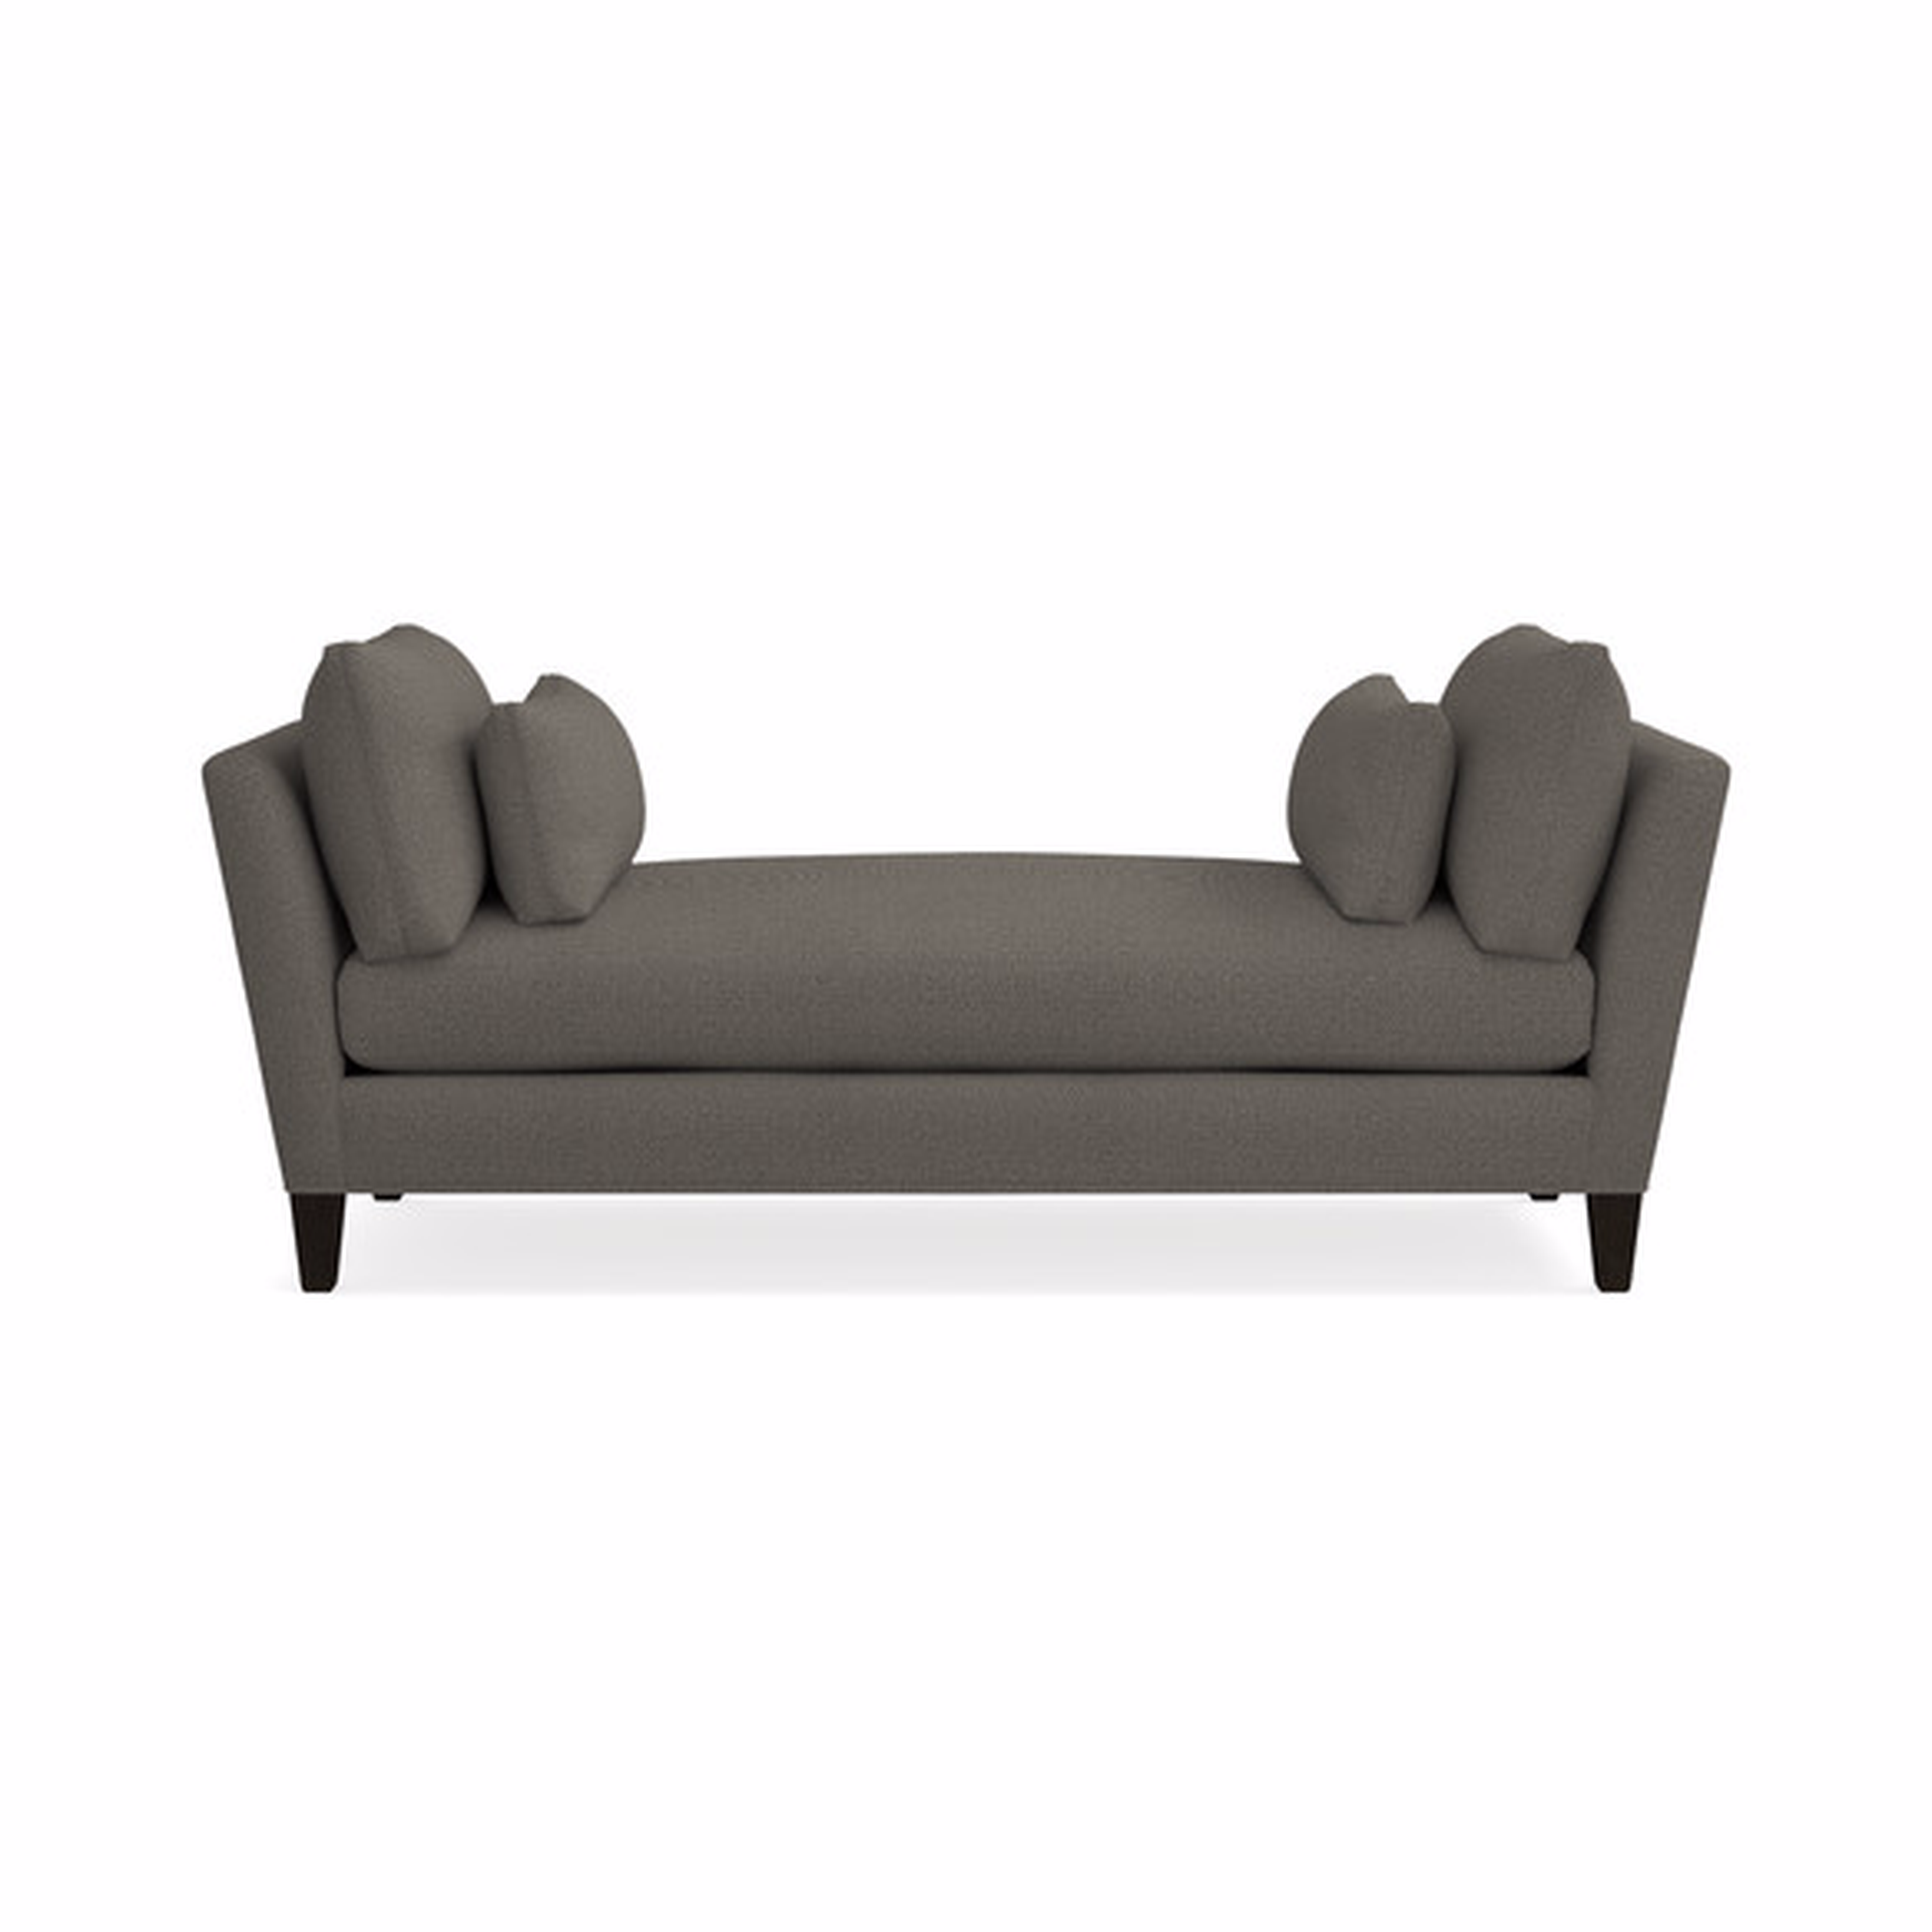 Marlowe Daybed, Taft, Steel, Fossil legs - Crate and Barrel